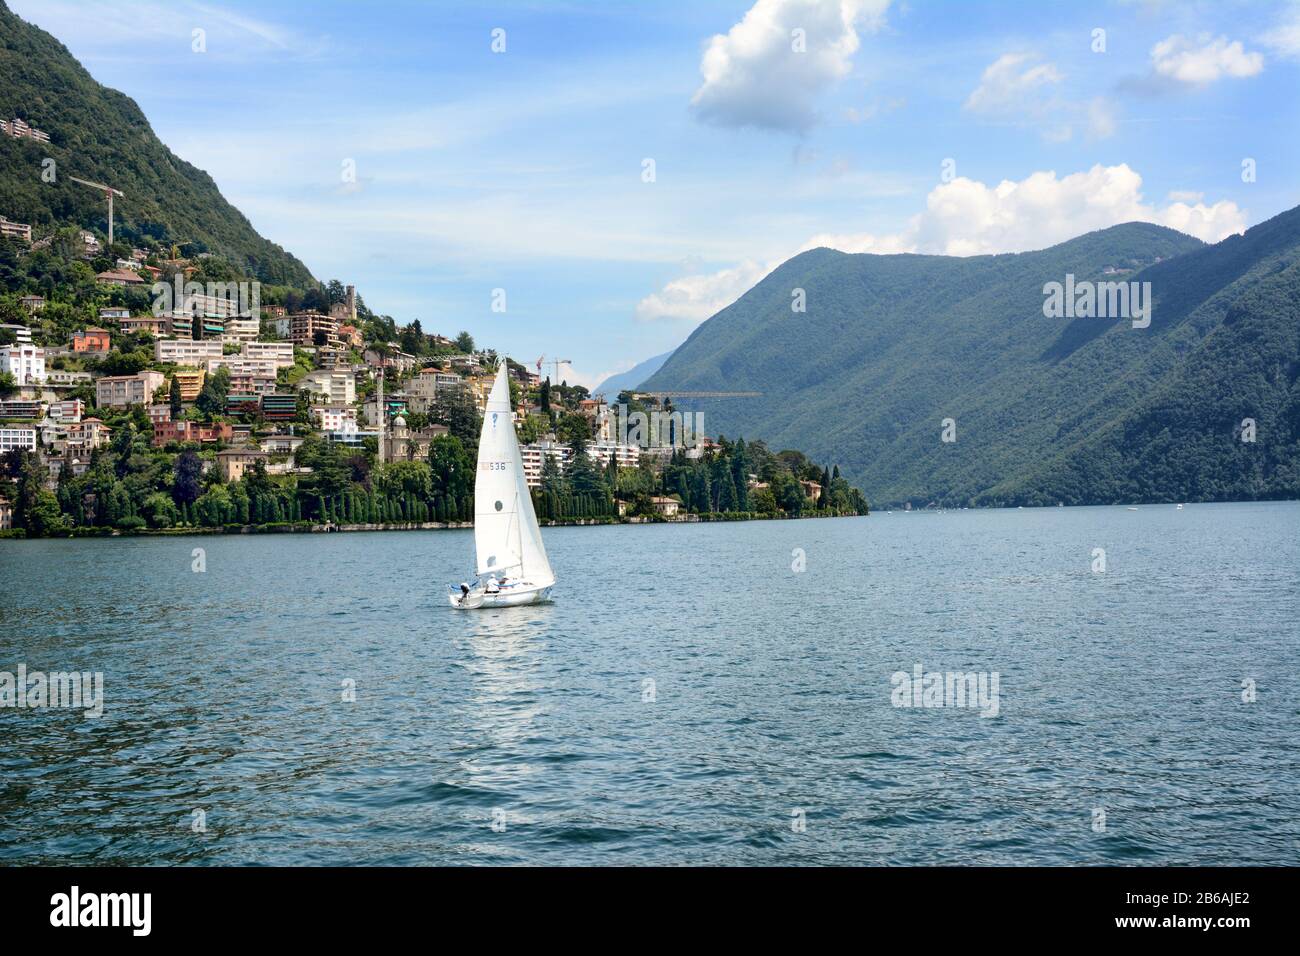 LUGANO, SWITZERLAND - JULY 5, 2014: Sailboat on Lake Lugano, with Mt. Bre and Castagnola in the background. The lake is a glacial lake situated on the Stock Photo